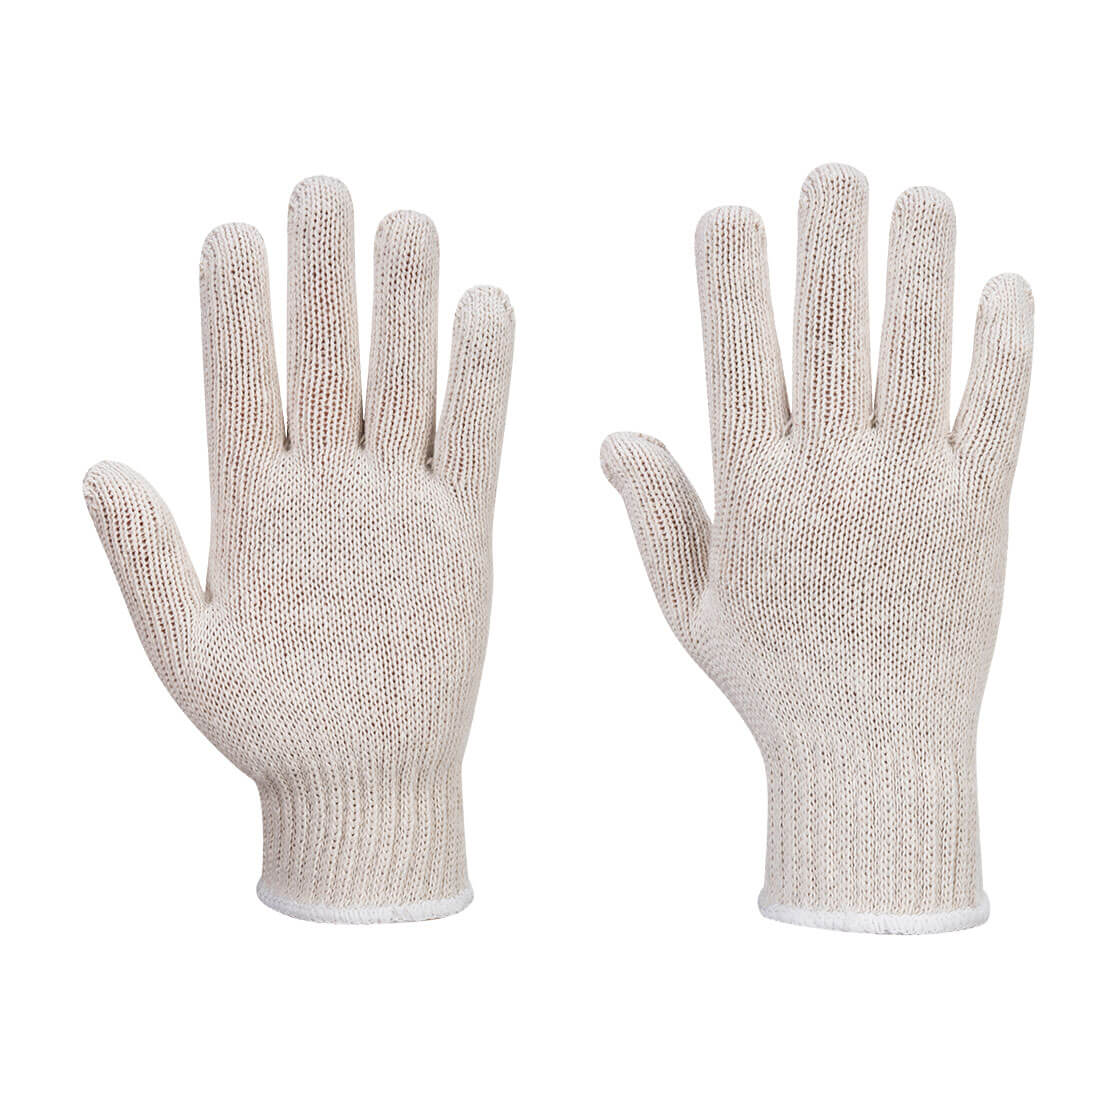 String Knit Liner Glove (288 Pairs)